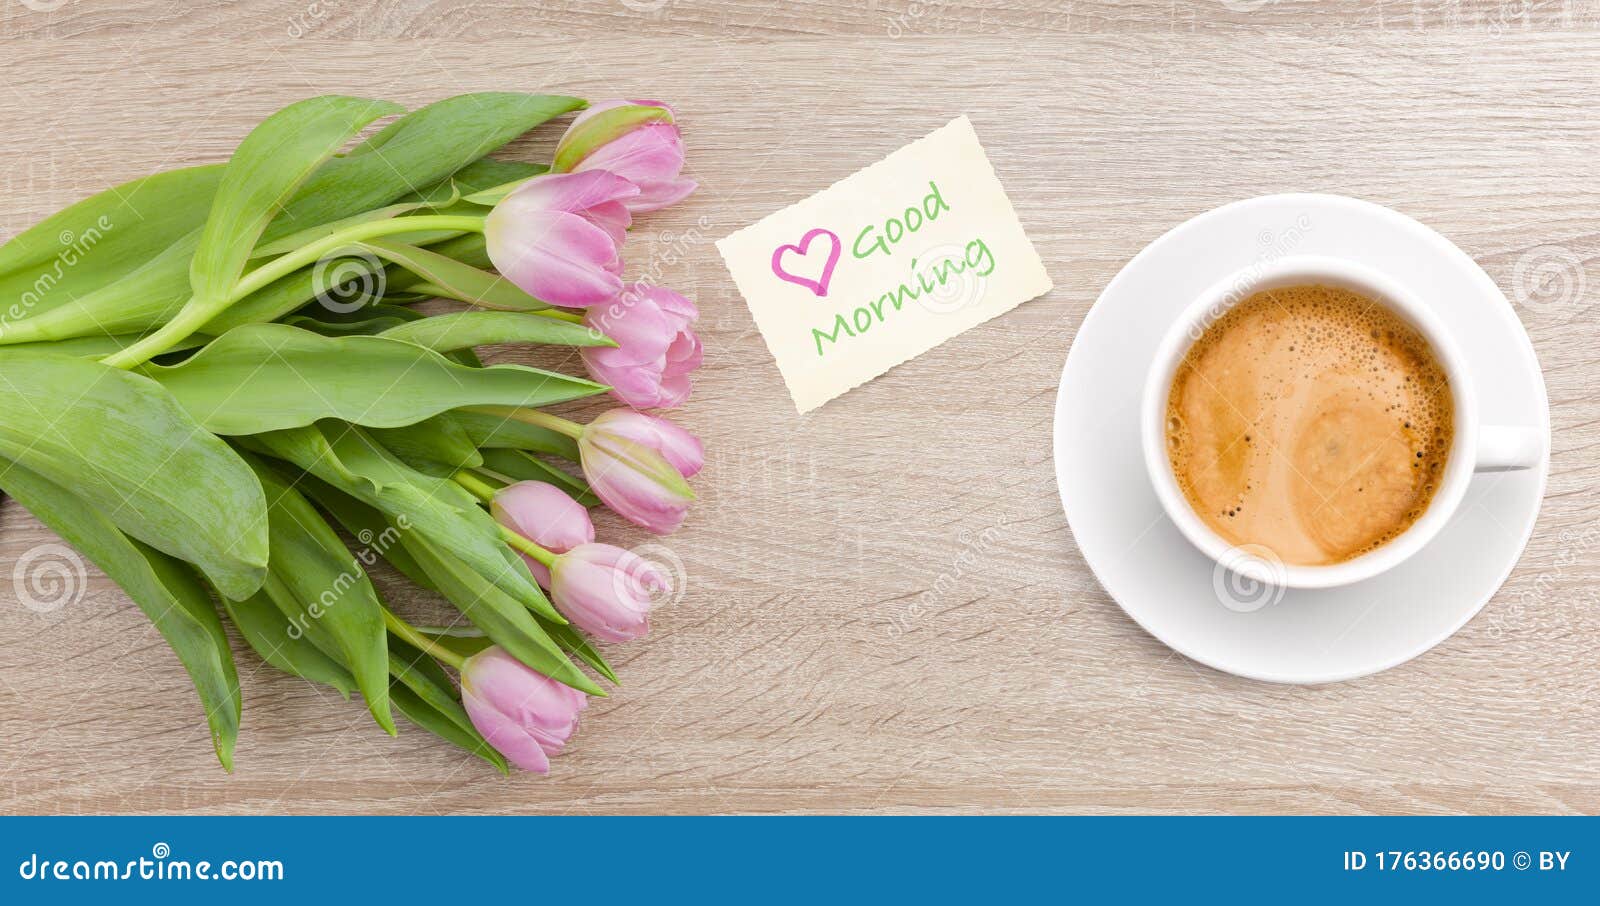 Good Morning` Greeting with Flowers and Coffee Stock Photo - Image ...